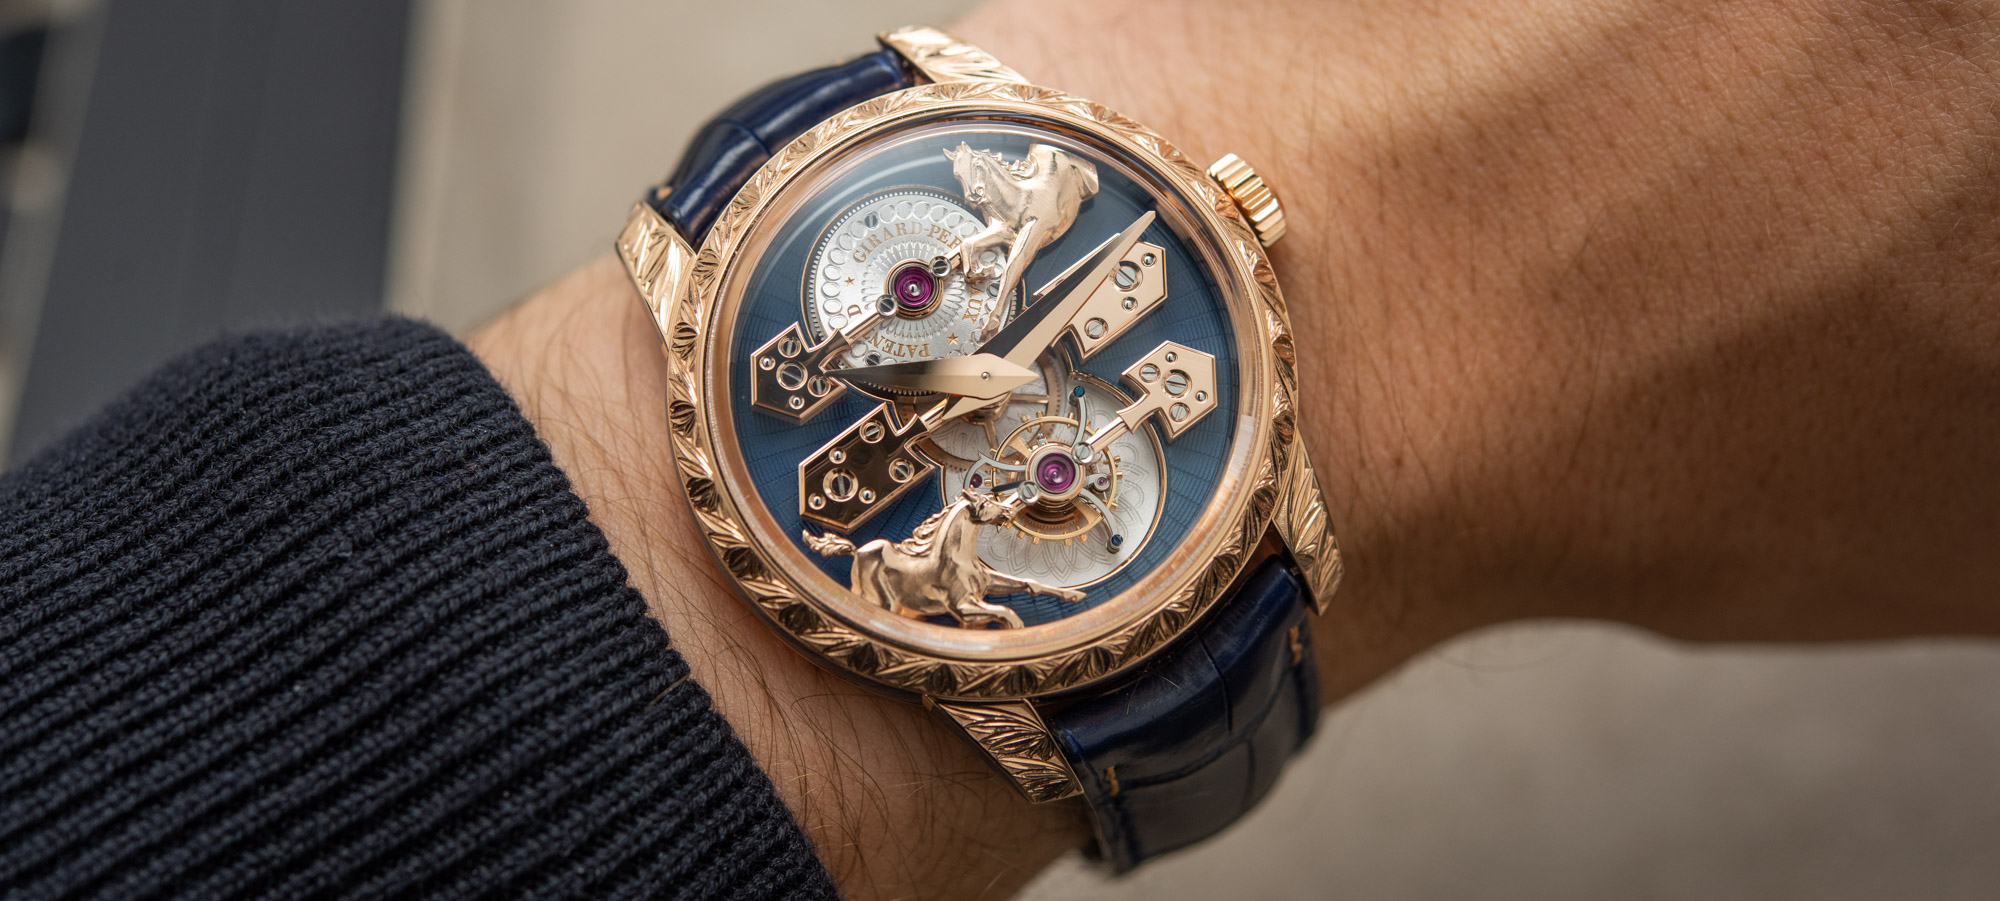 What Wrist Do You Wear a Watch On? - Luxury Of Watches